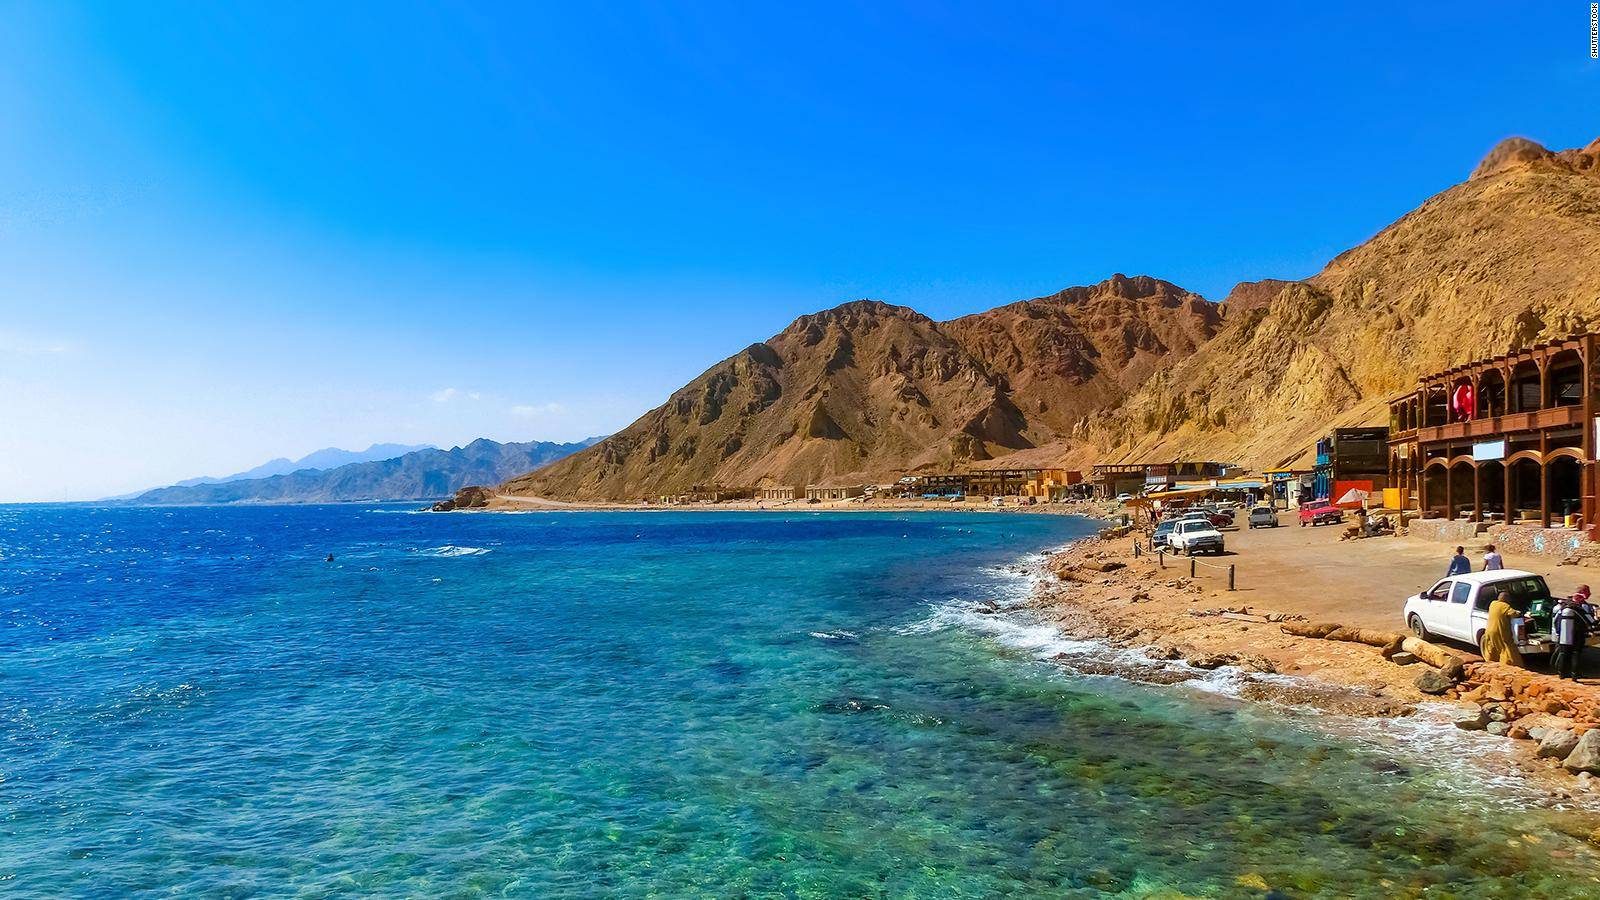 Day Tour to Dahab from Sharm